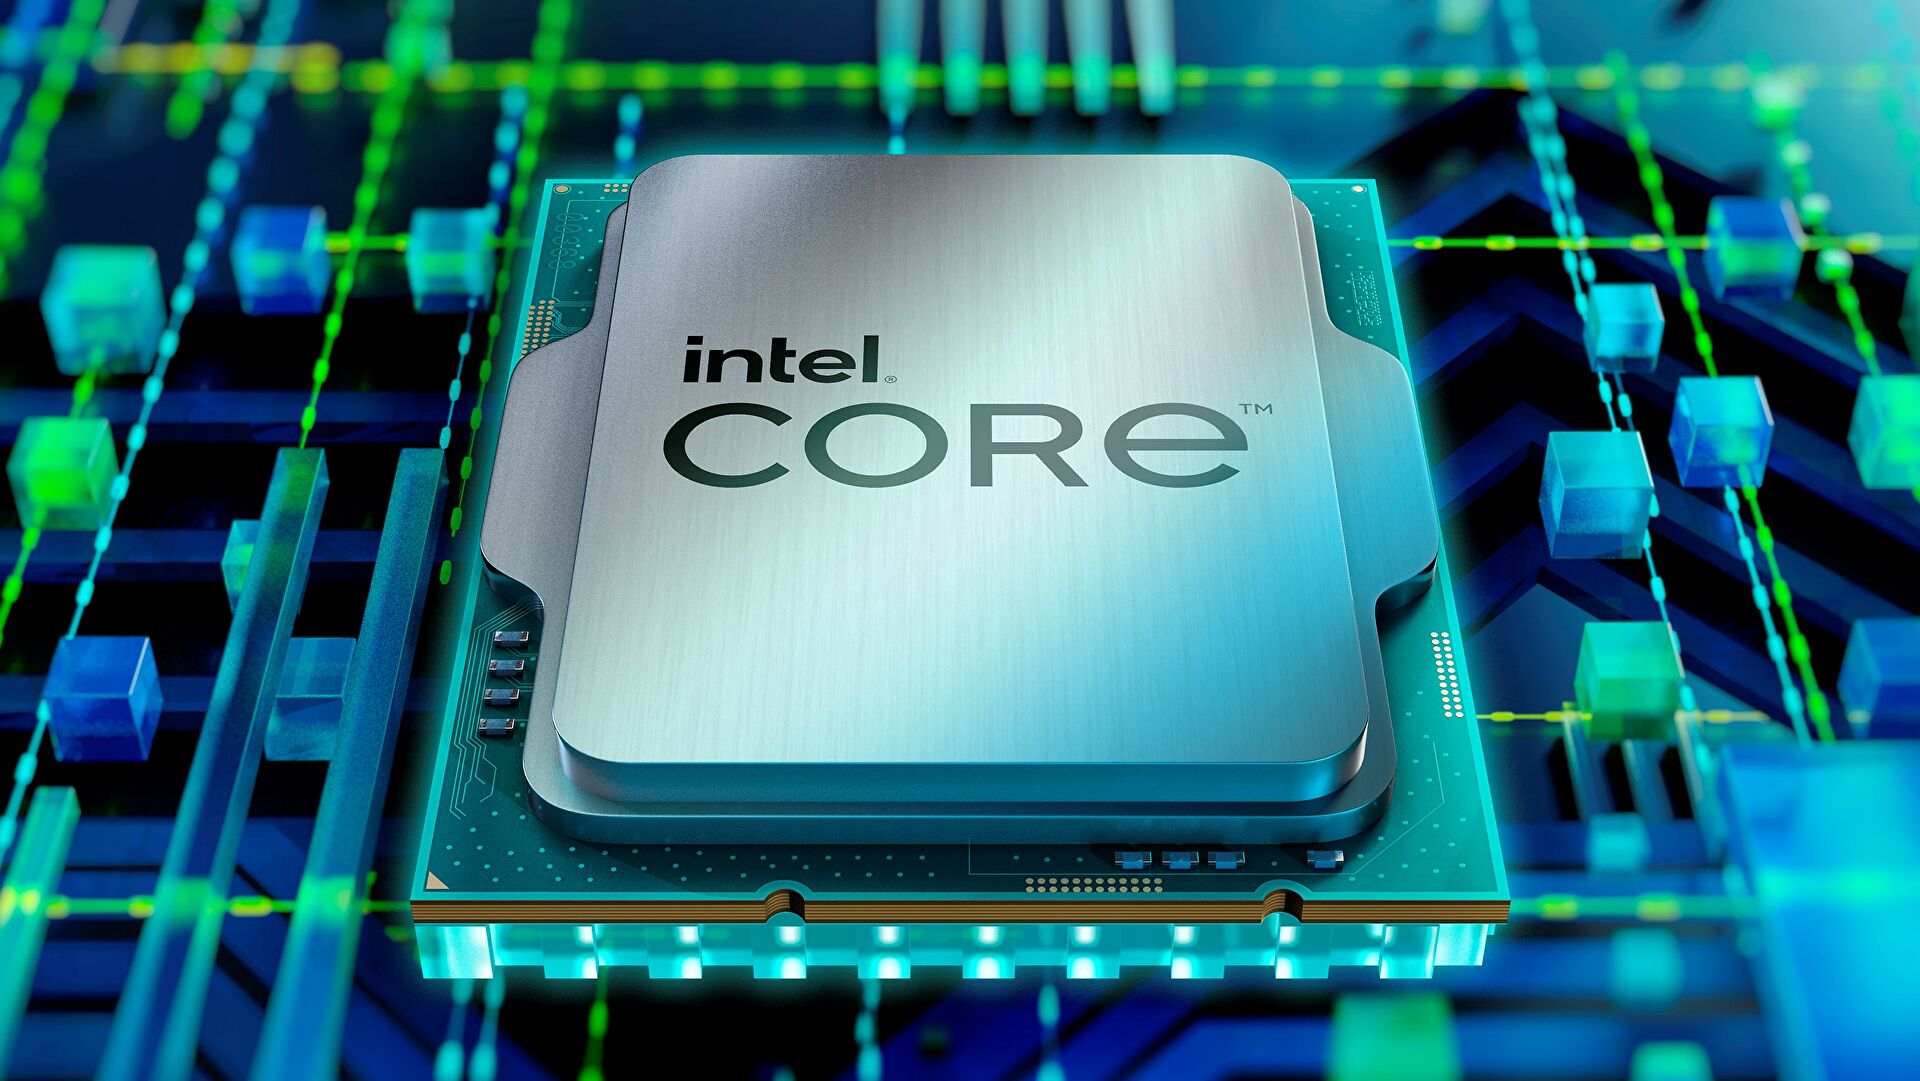 Intel Core i9-12900K up to 25% faster than Ryzen 9 5950X in new leaks